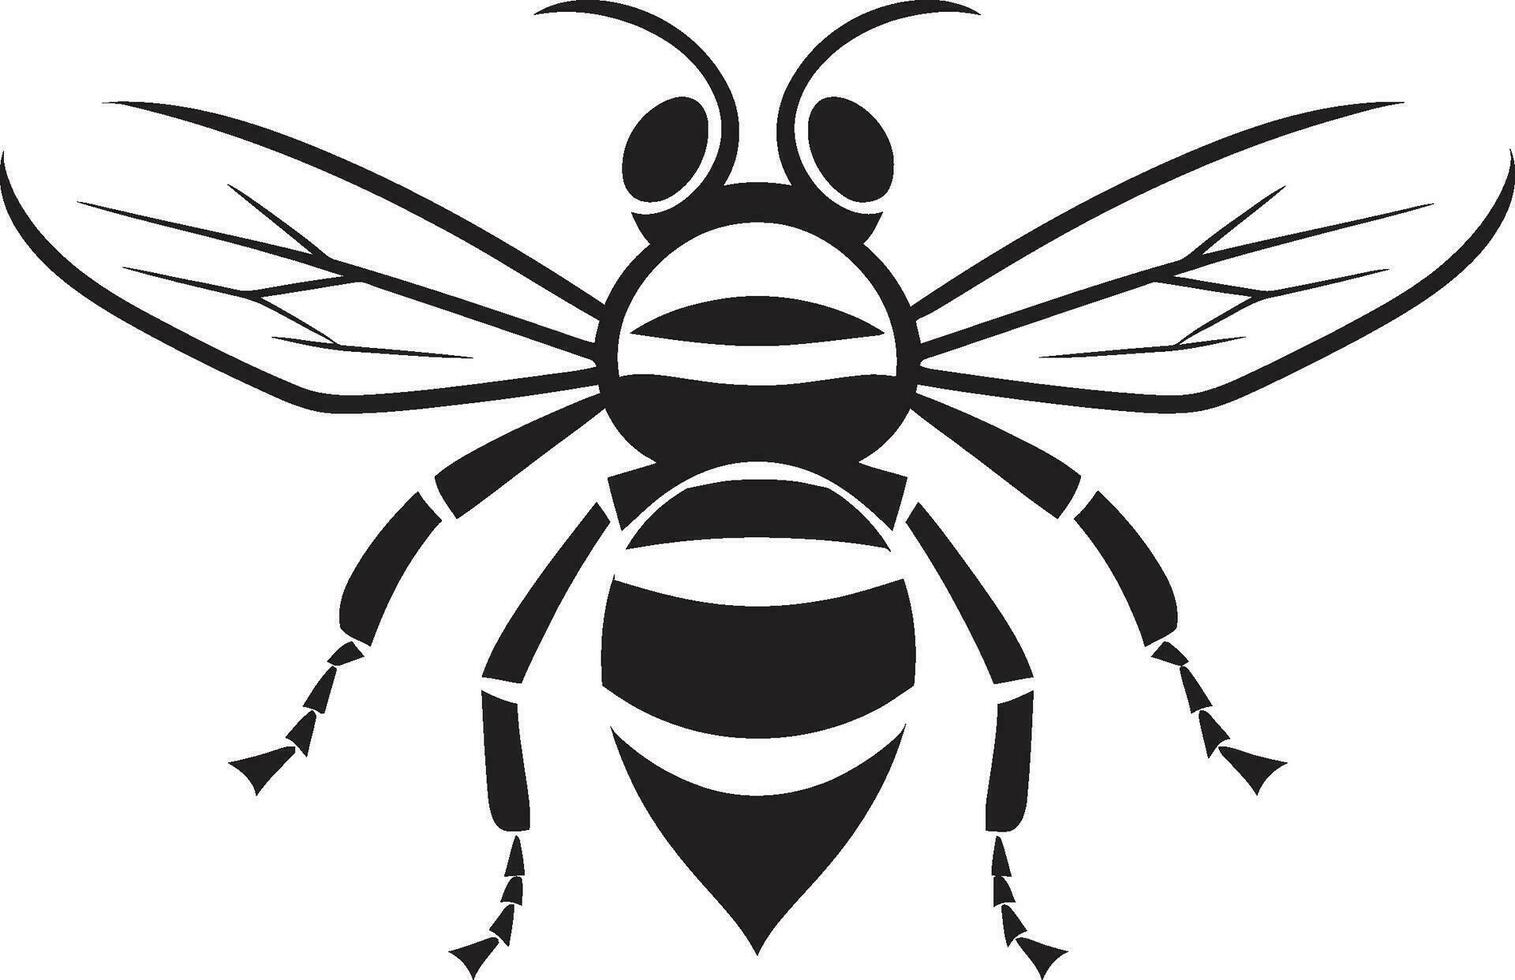 Strength and Power Black Hornet Emblem Elegance in Simplicity Iconic Insect vector